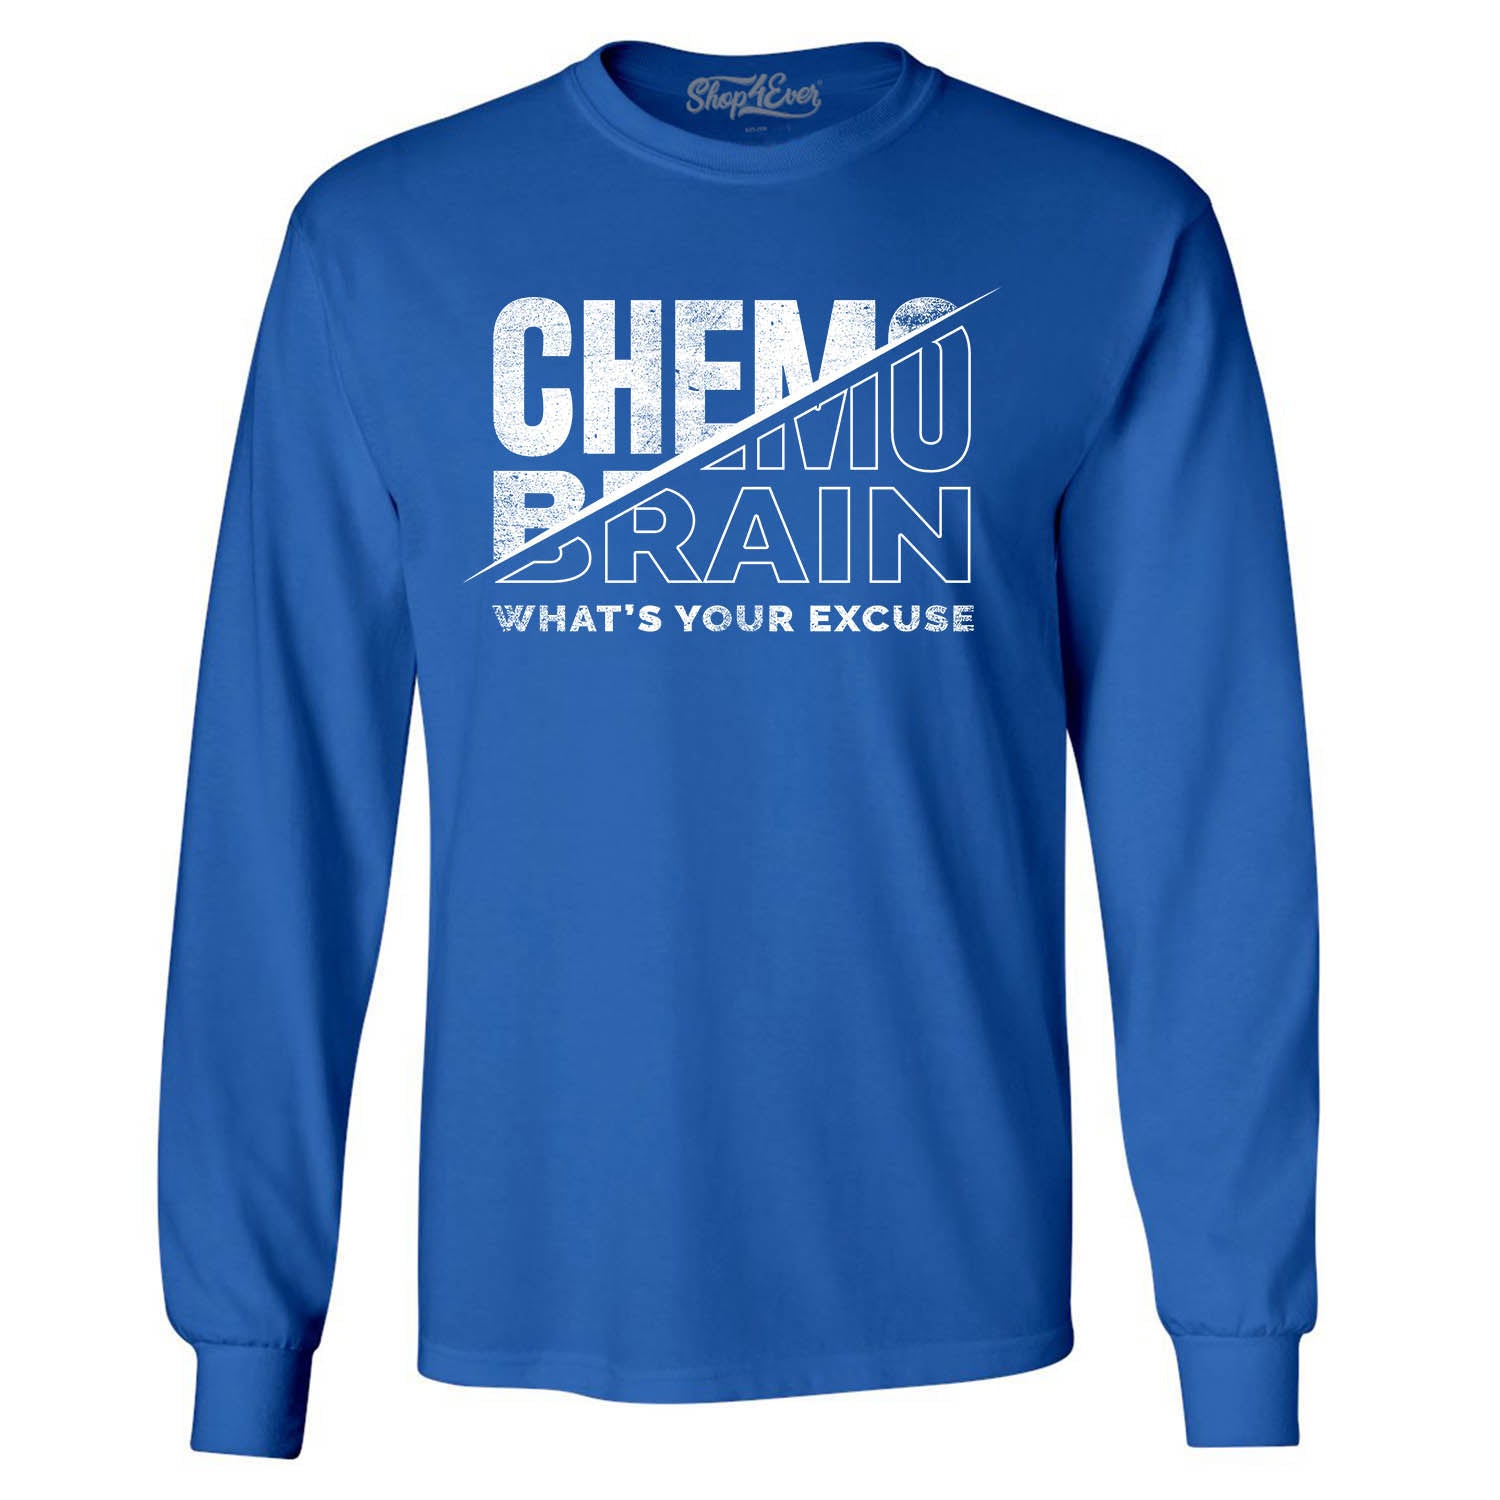 Chemo Brain What's Your Excuse? Funny Long Sleeve Shirt